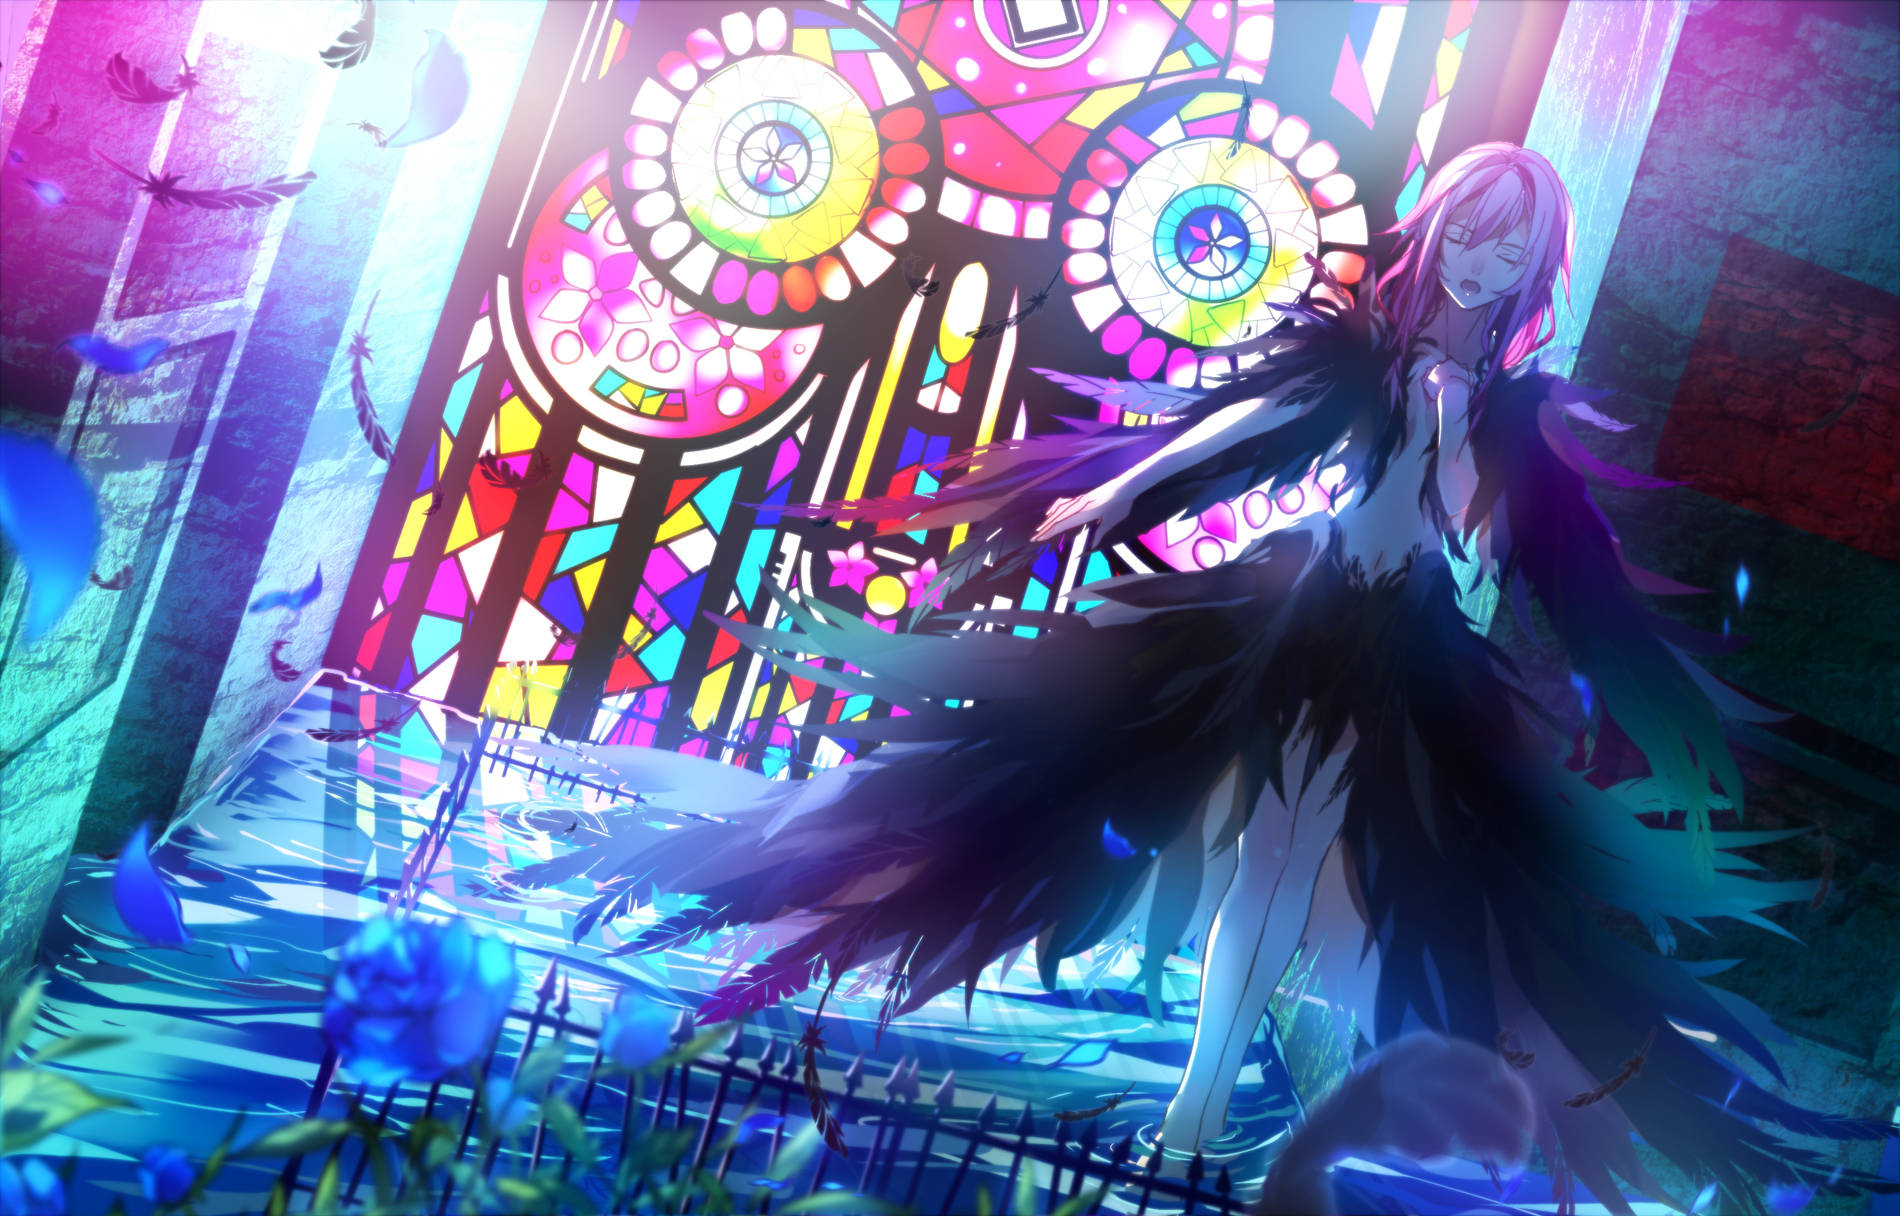 Guilty Crown Inori In Feathery Outfit Background